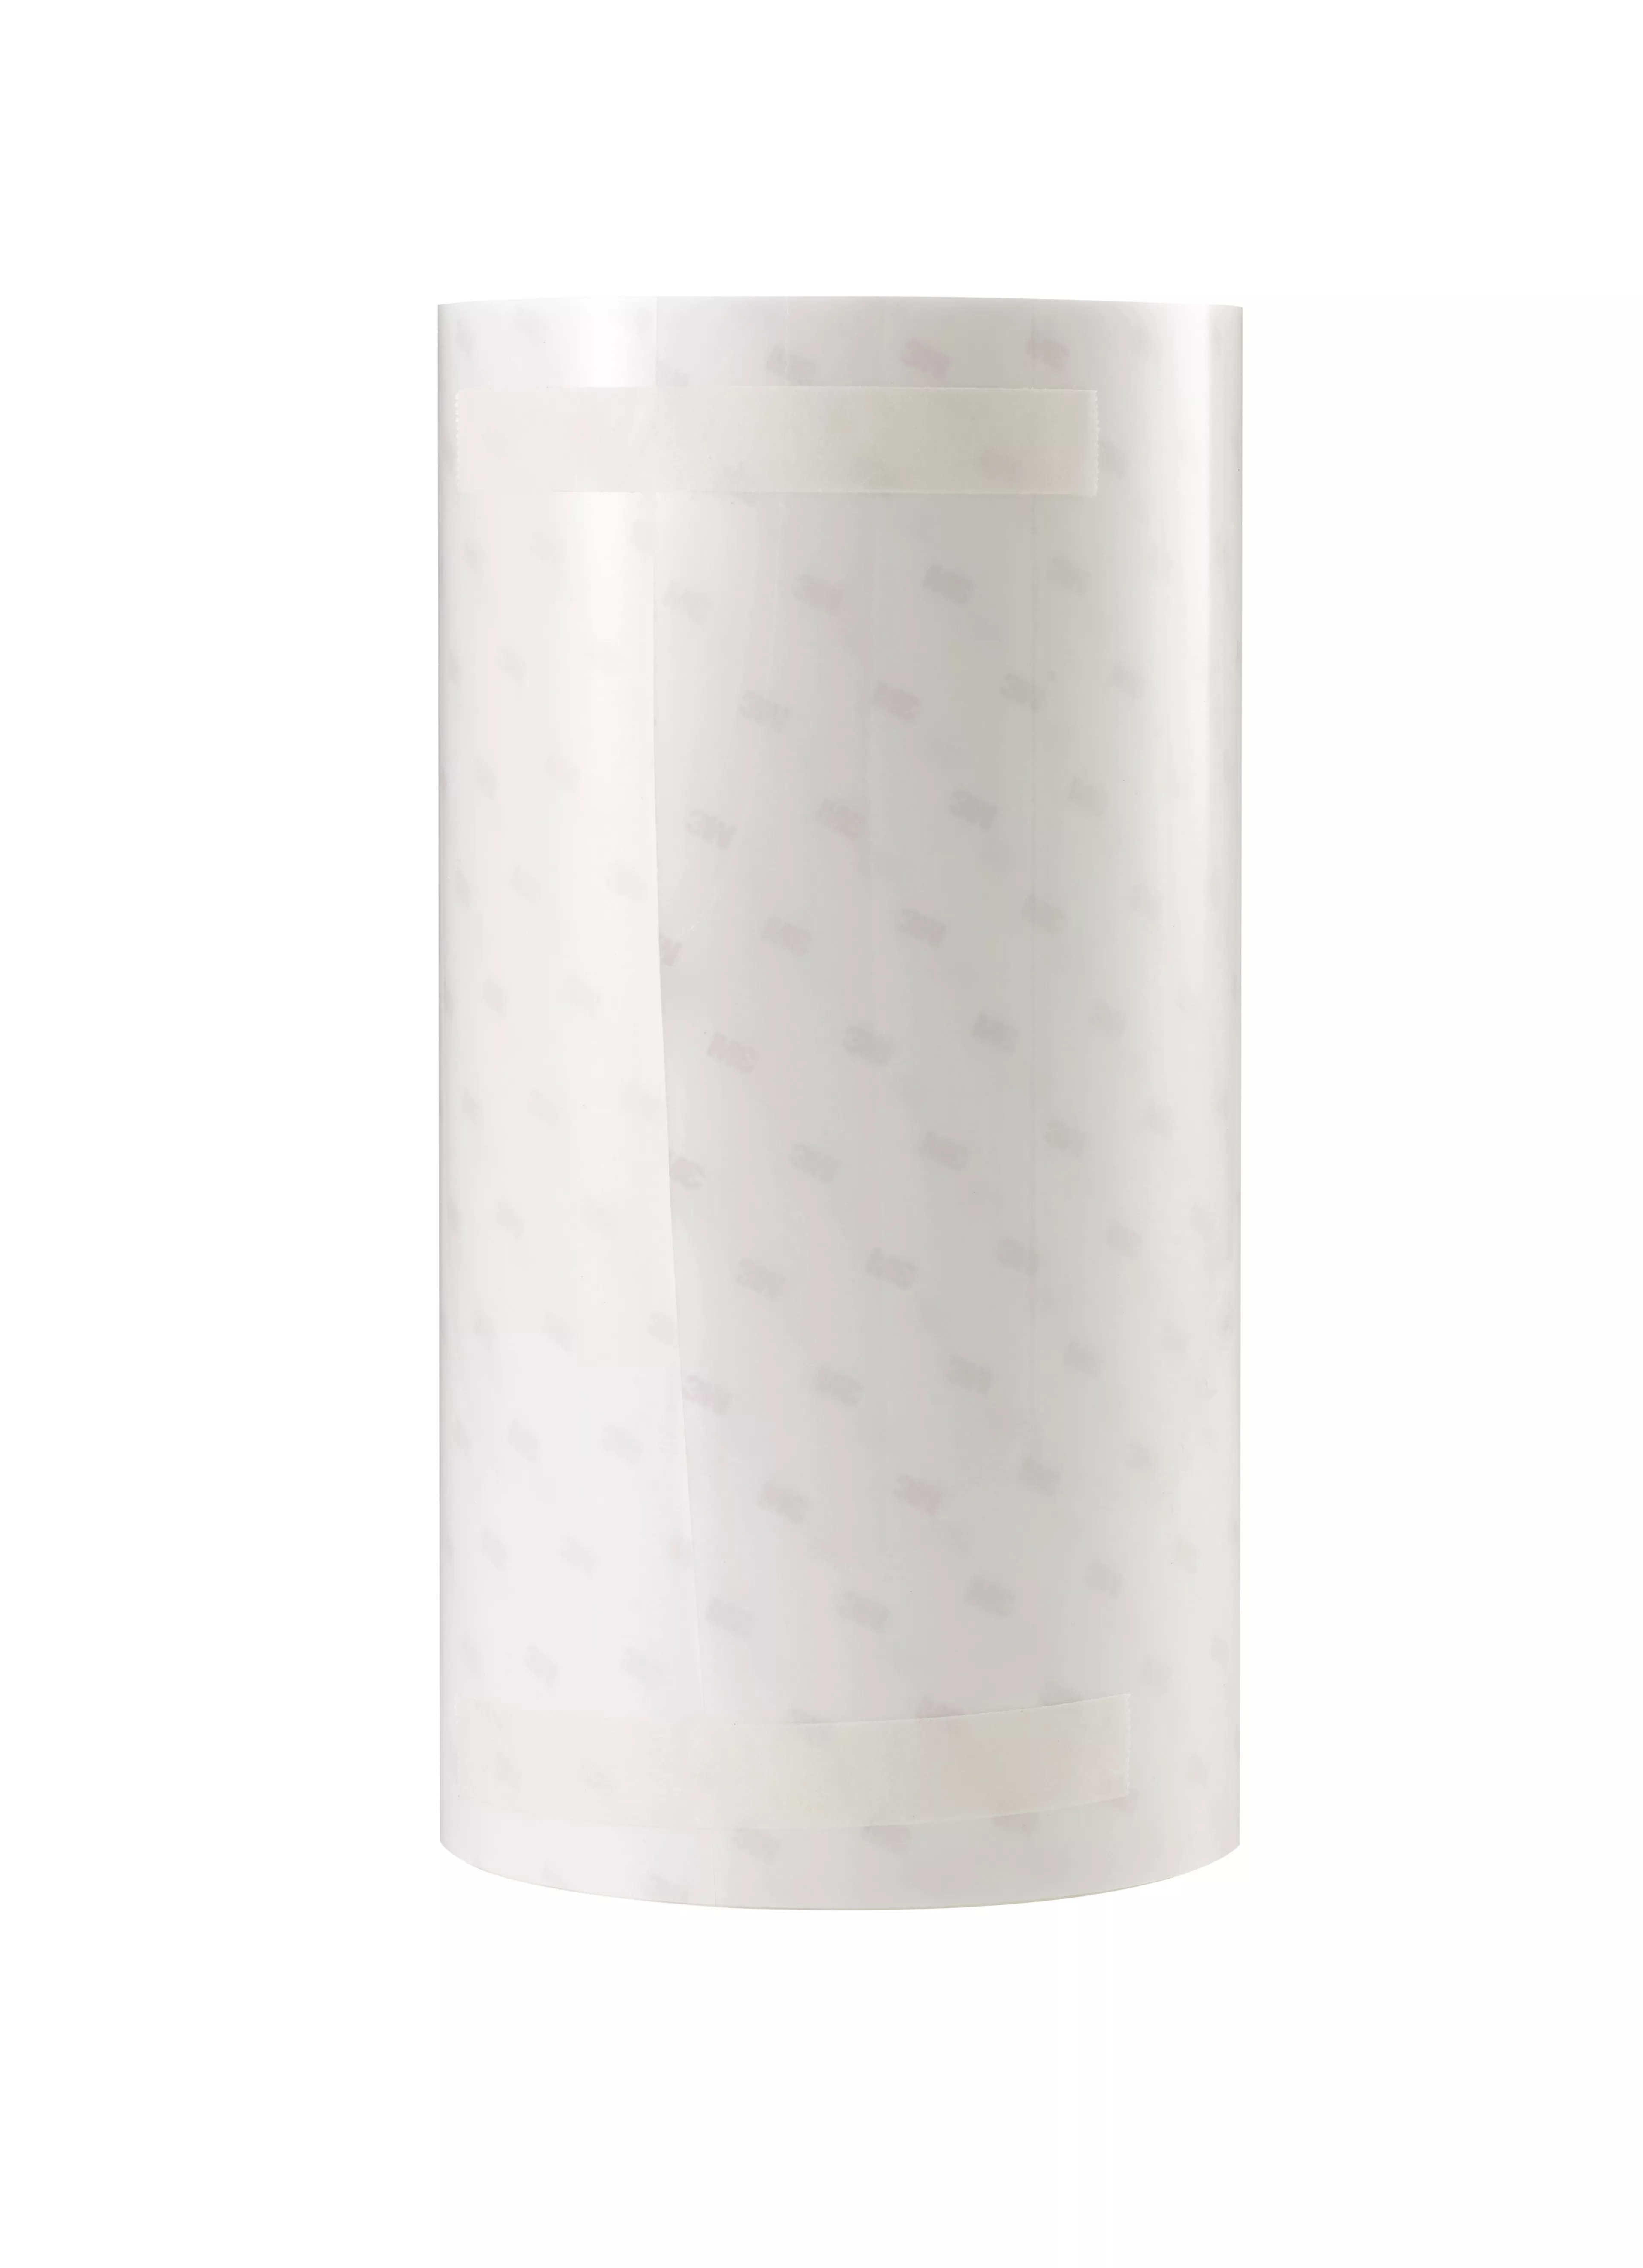 3M™ Industrial Protective Film 7071UV, 6 in x 36 yd, 14 mil, 1 roll per
case